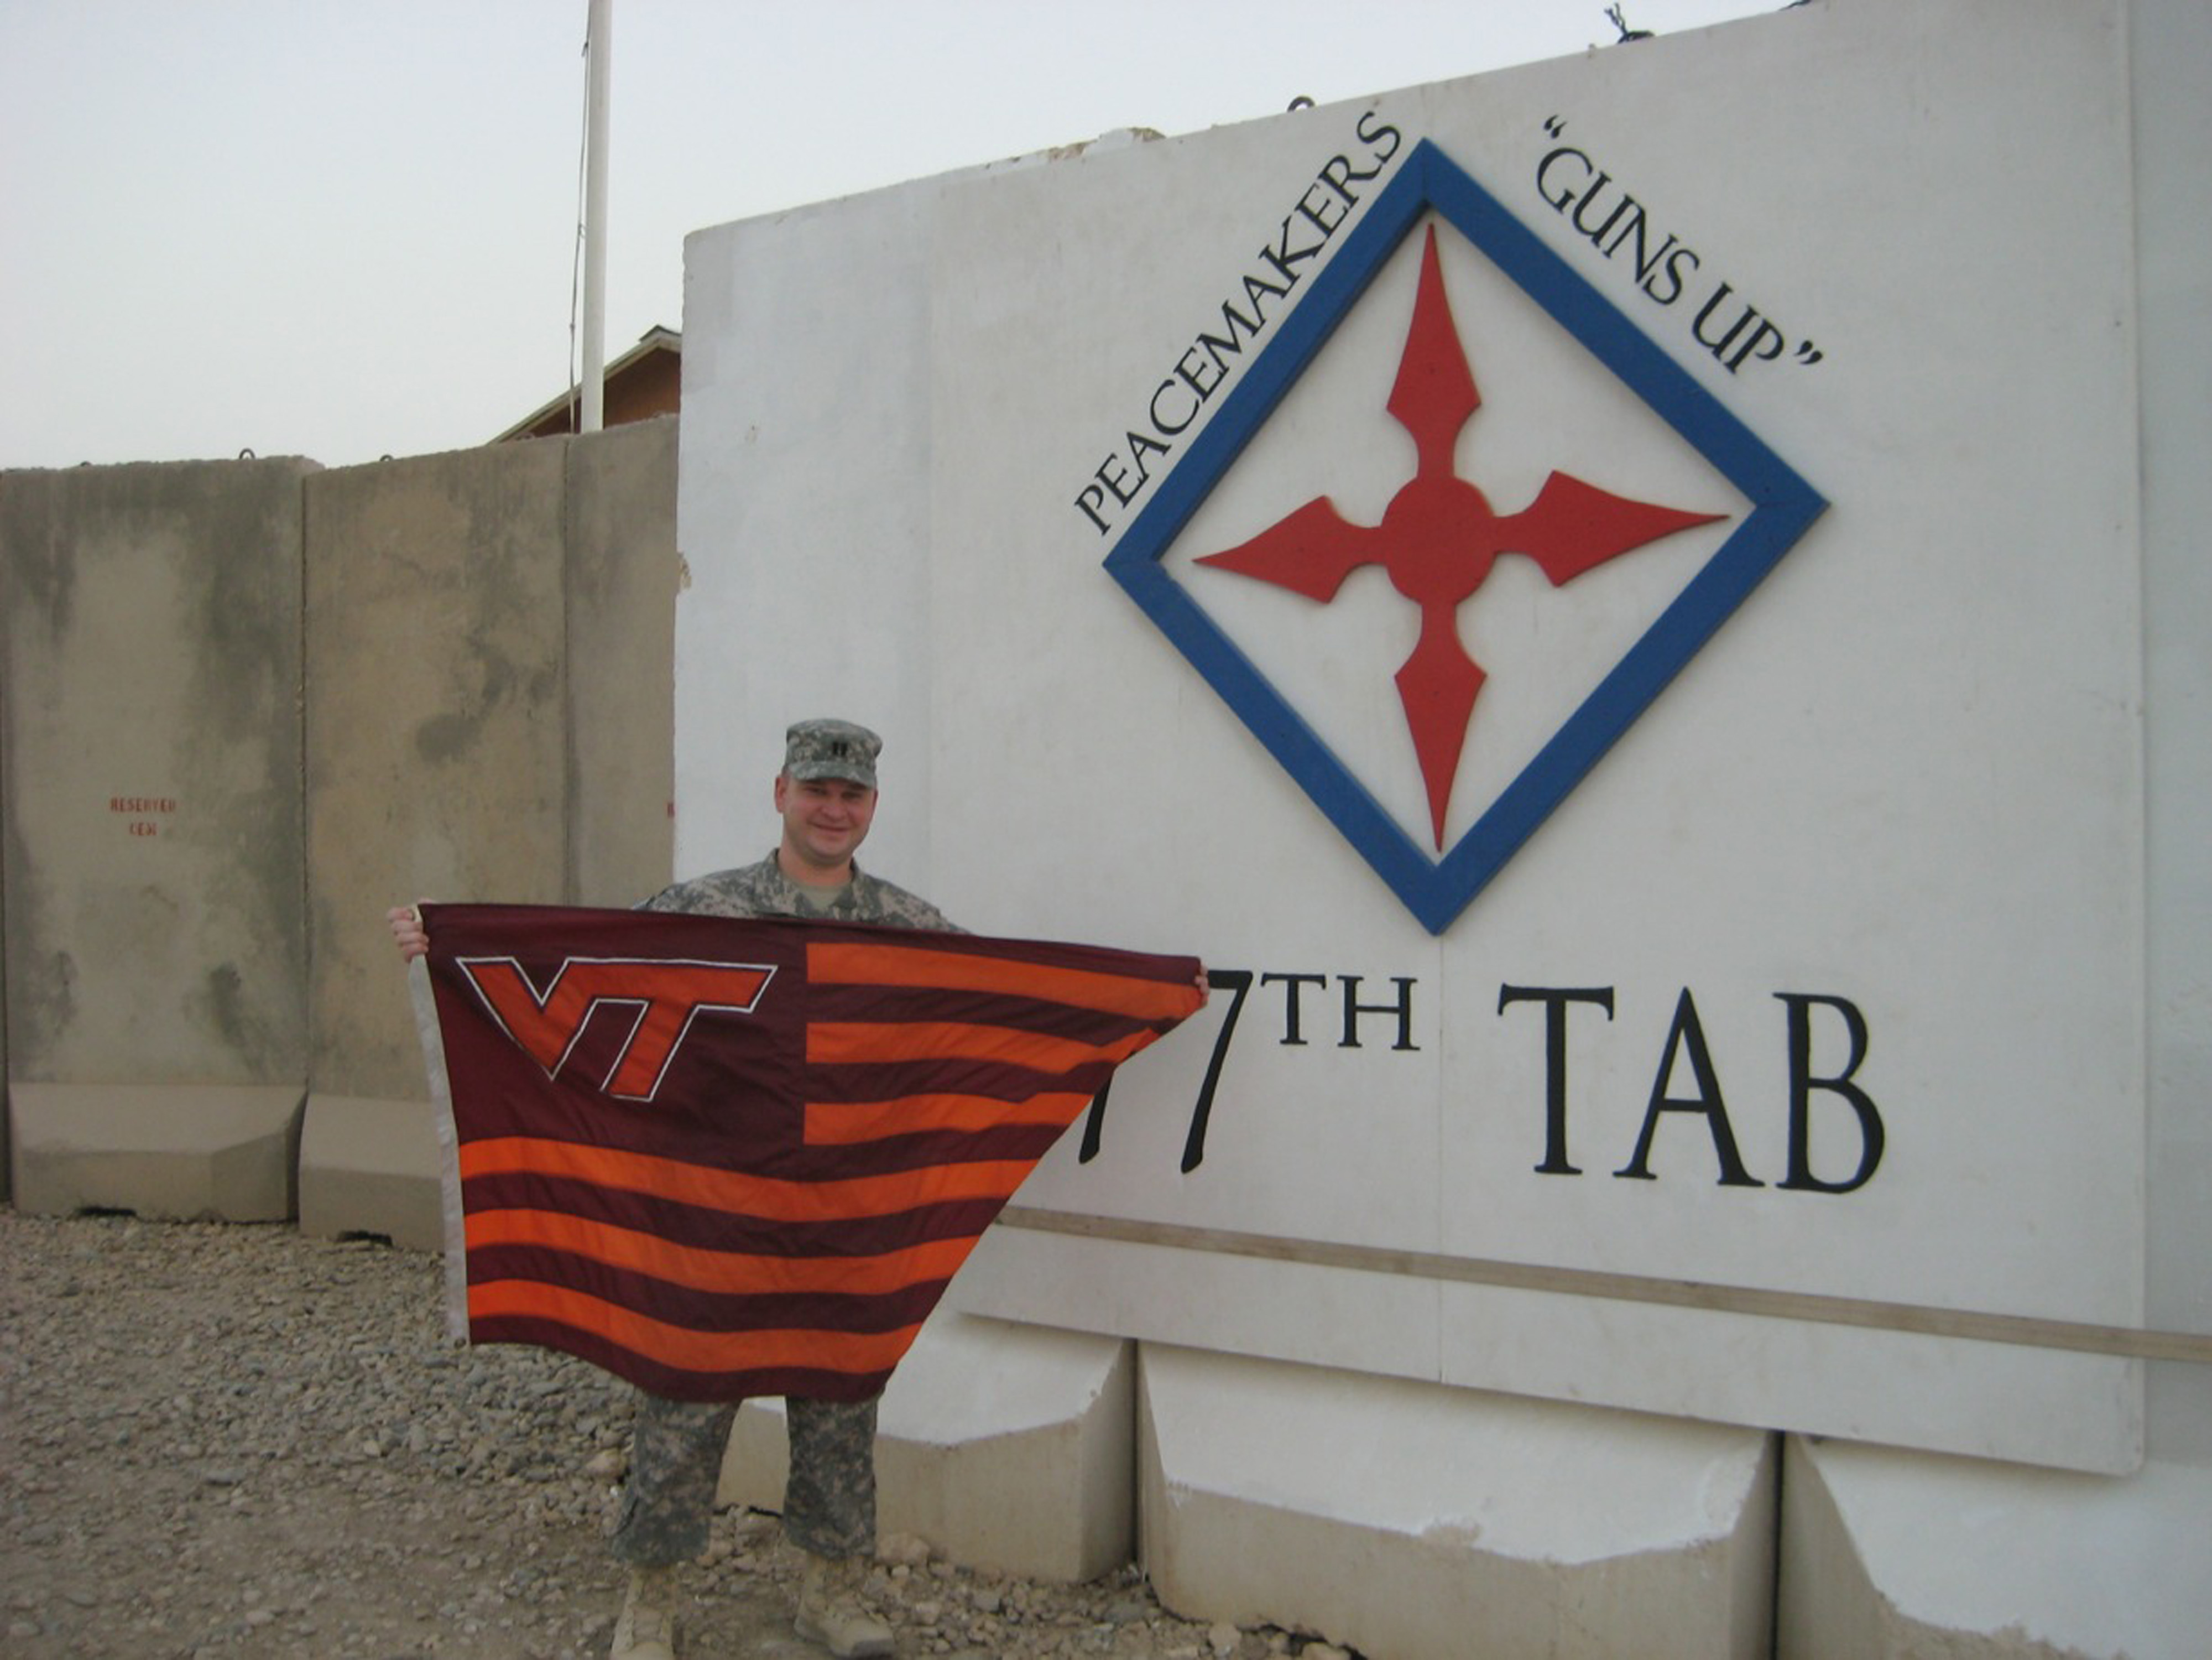 Capt. Danny Kane, U.S. Army, Virginia Tech Corps of Cadets Class of 2002 shown at Operating Base Adder, Iraq